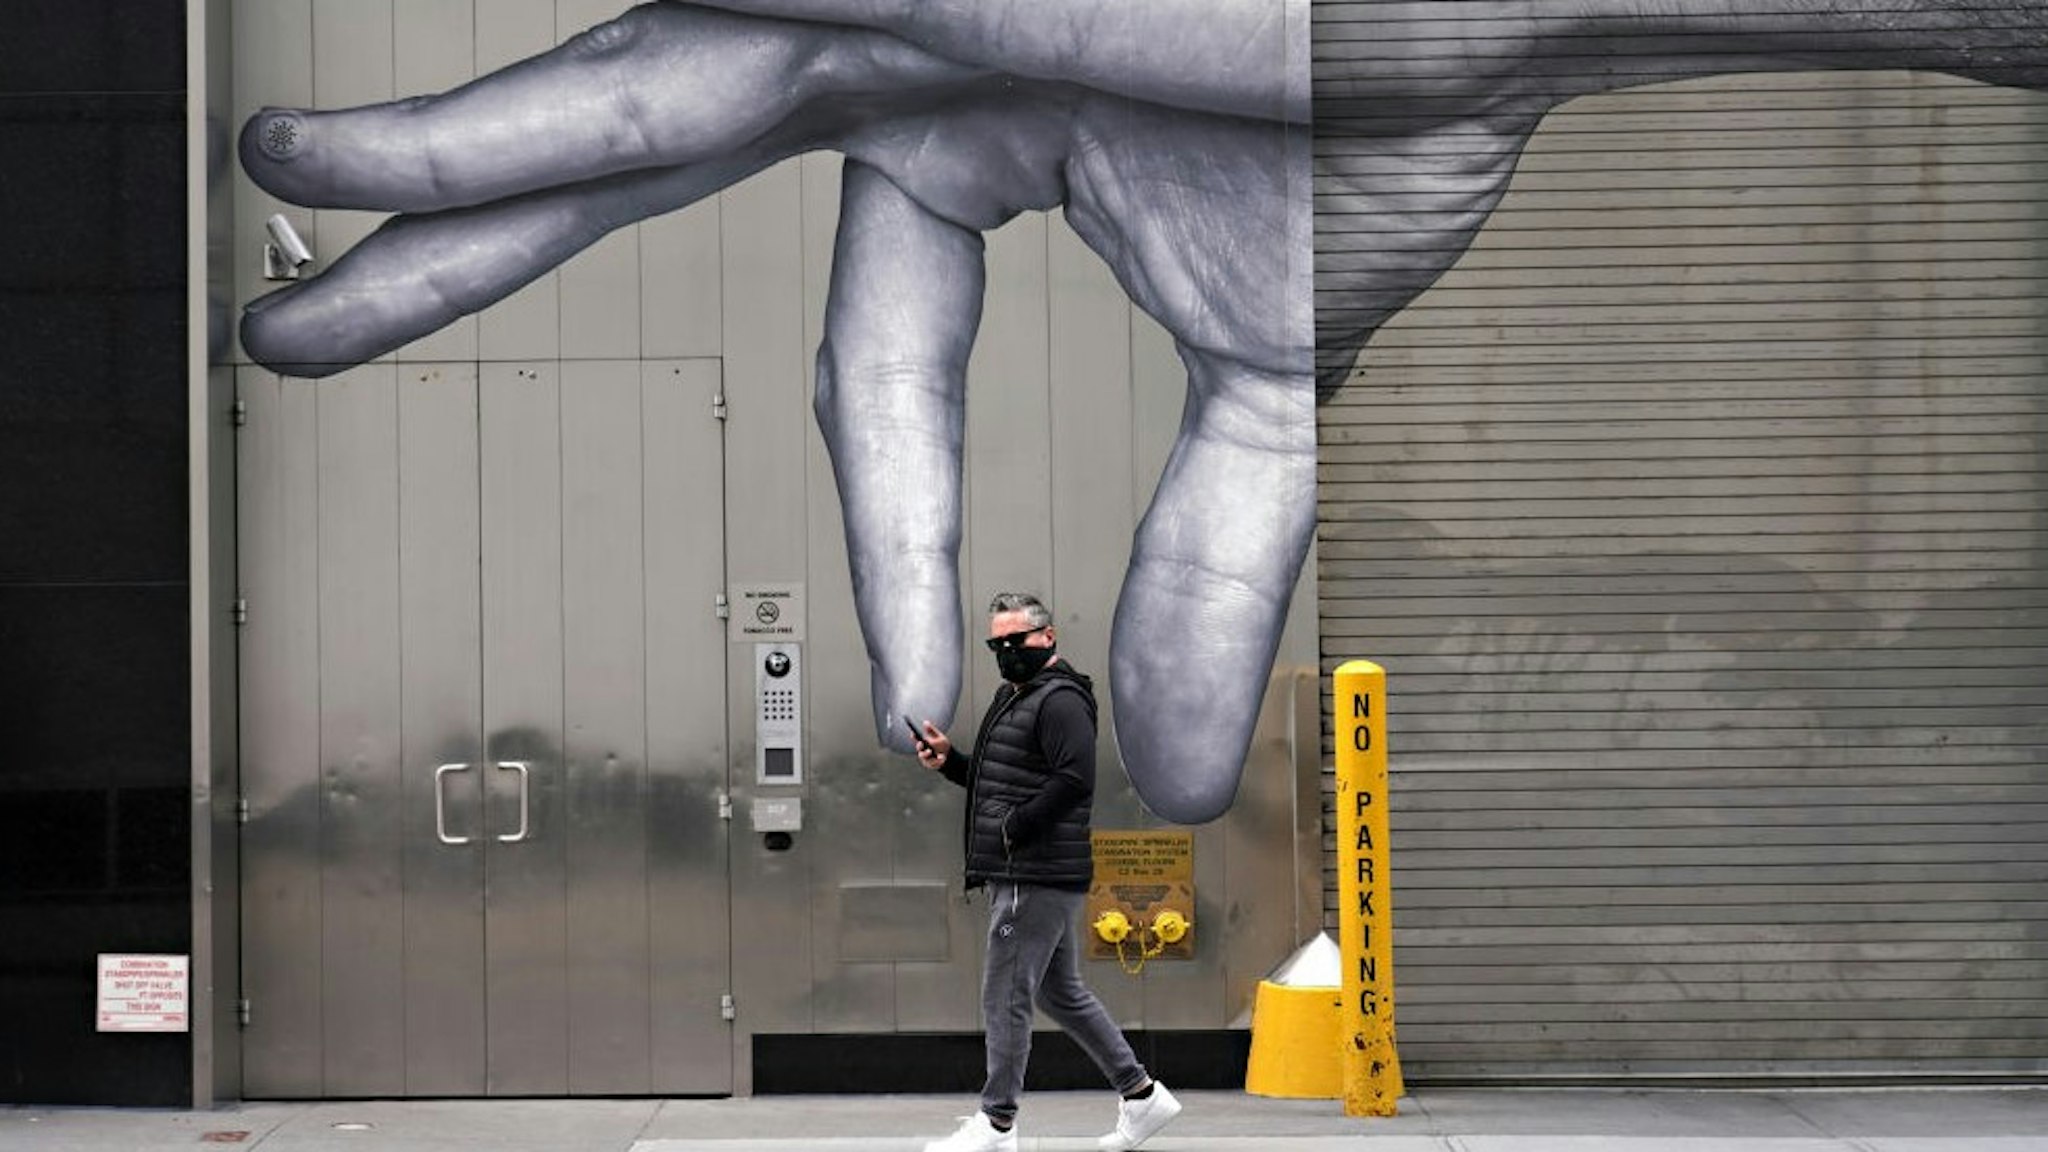 NEW YORK, NEW YORK - APRIL 05: A man wearing a protective mask walks by street art amid the coronavirus pandemic on April 05, 2020 in New York City. COVID-19 has spread to most countries around the world, claiming almost 70,000 lives with infections nearing 1.3 million people. (Photo by